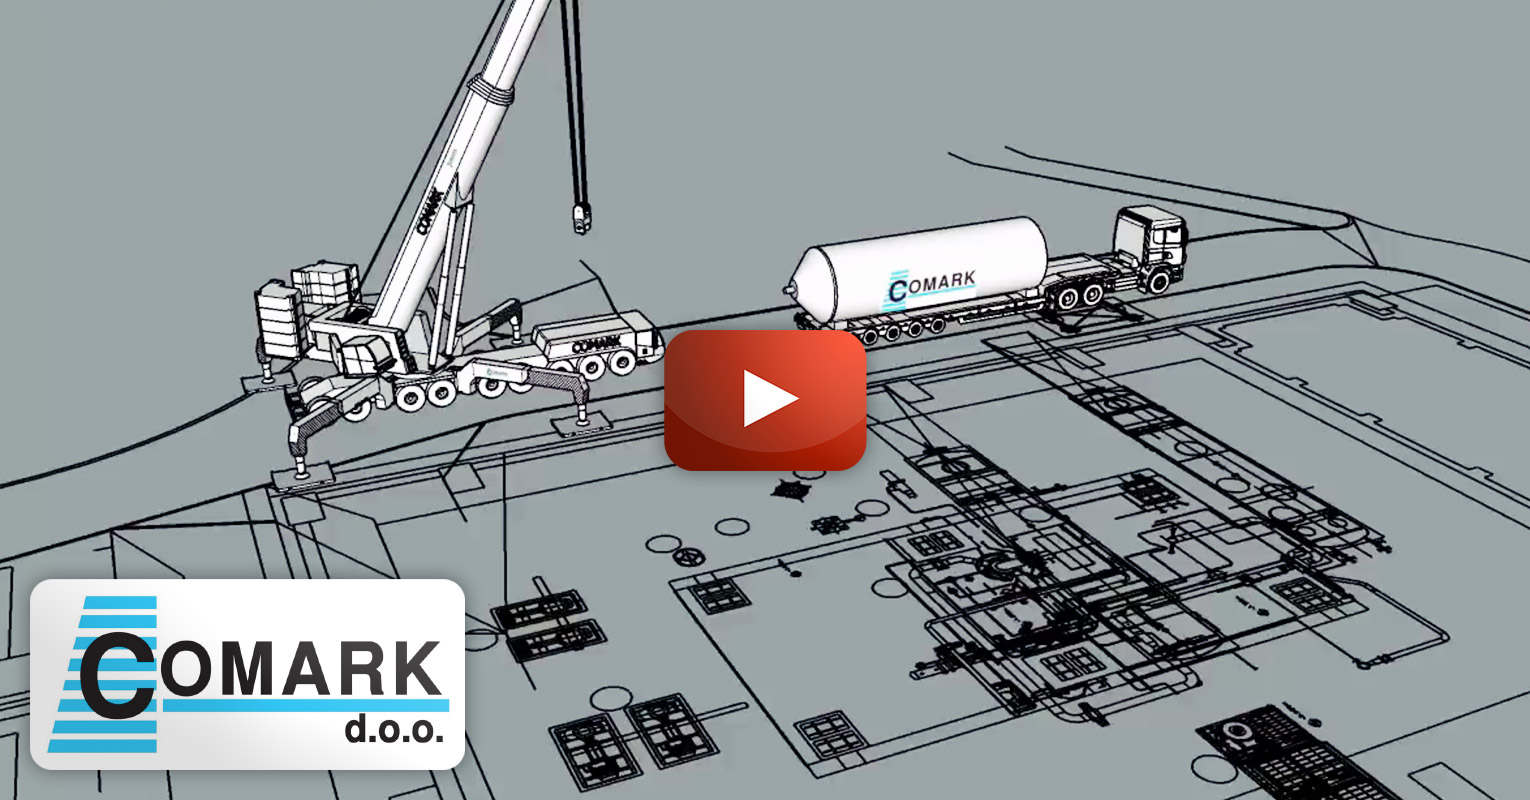 Video - Comark Shows an Example of a Detailed Layout of Transport and Lifting Operations they Designed for a Customer